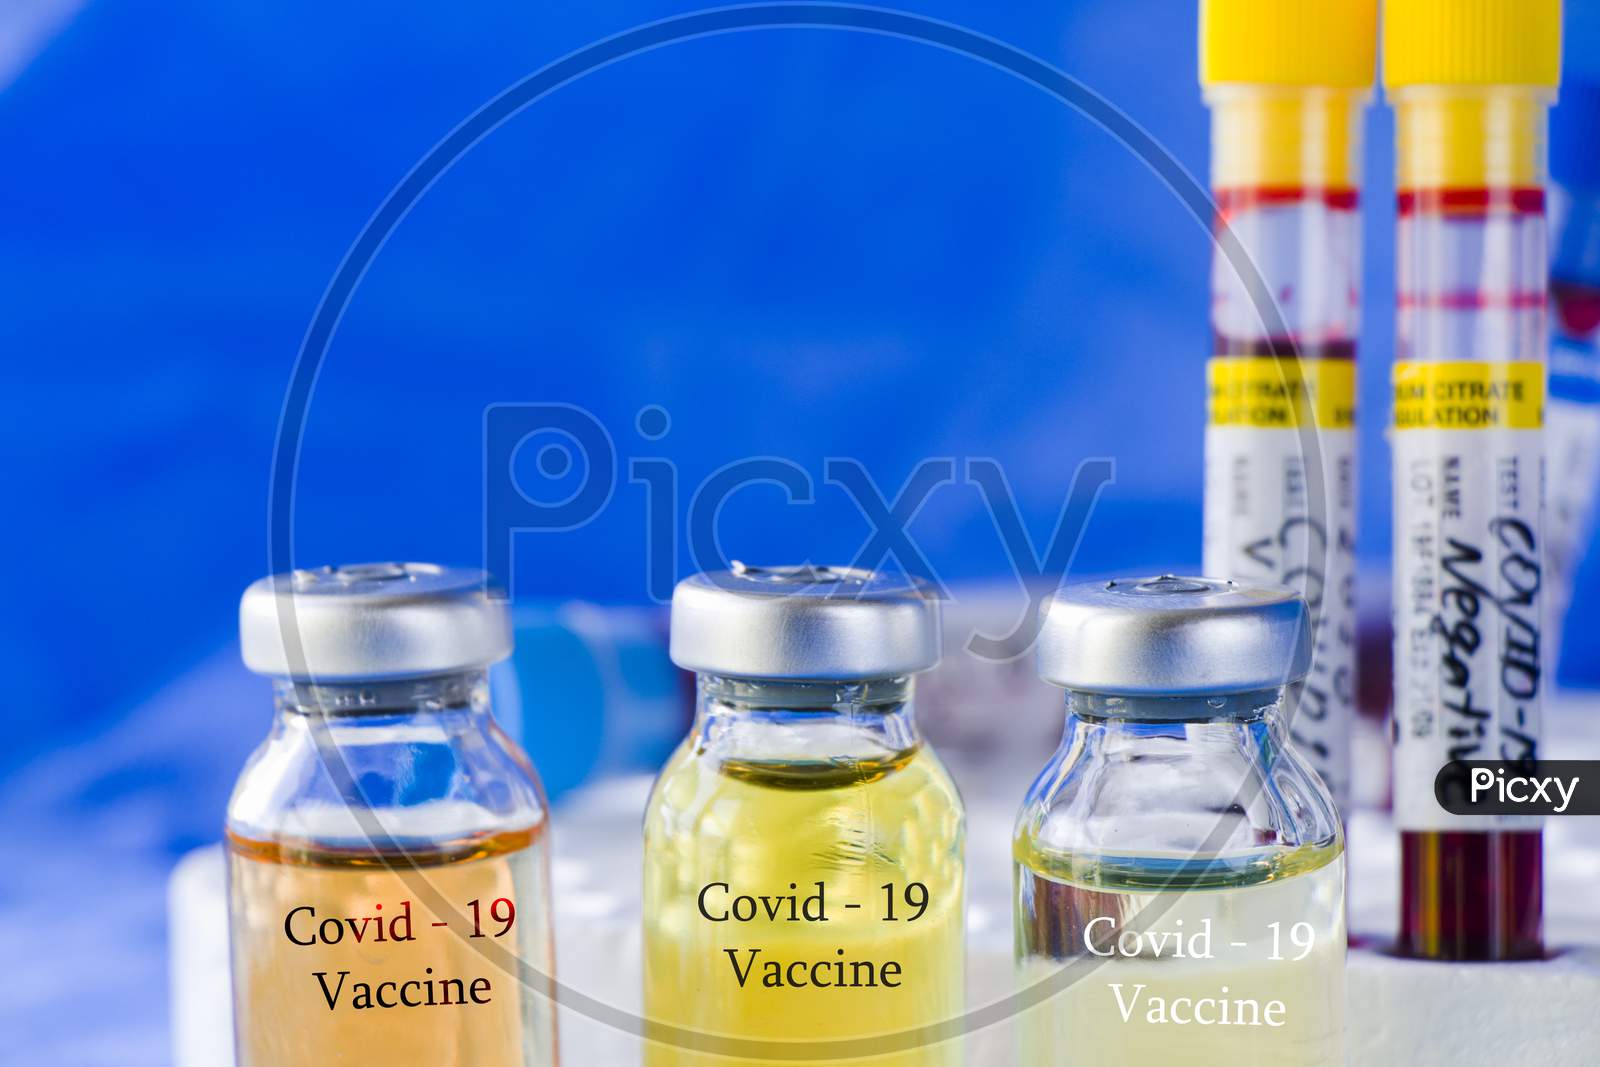 Corona Virus And Covid - 19 New Vaccine In Ampules And Blood Tube, Variations Of Vaccine